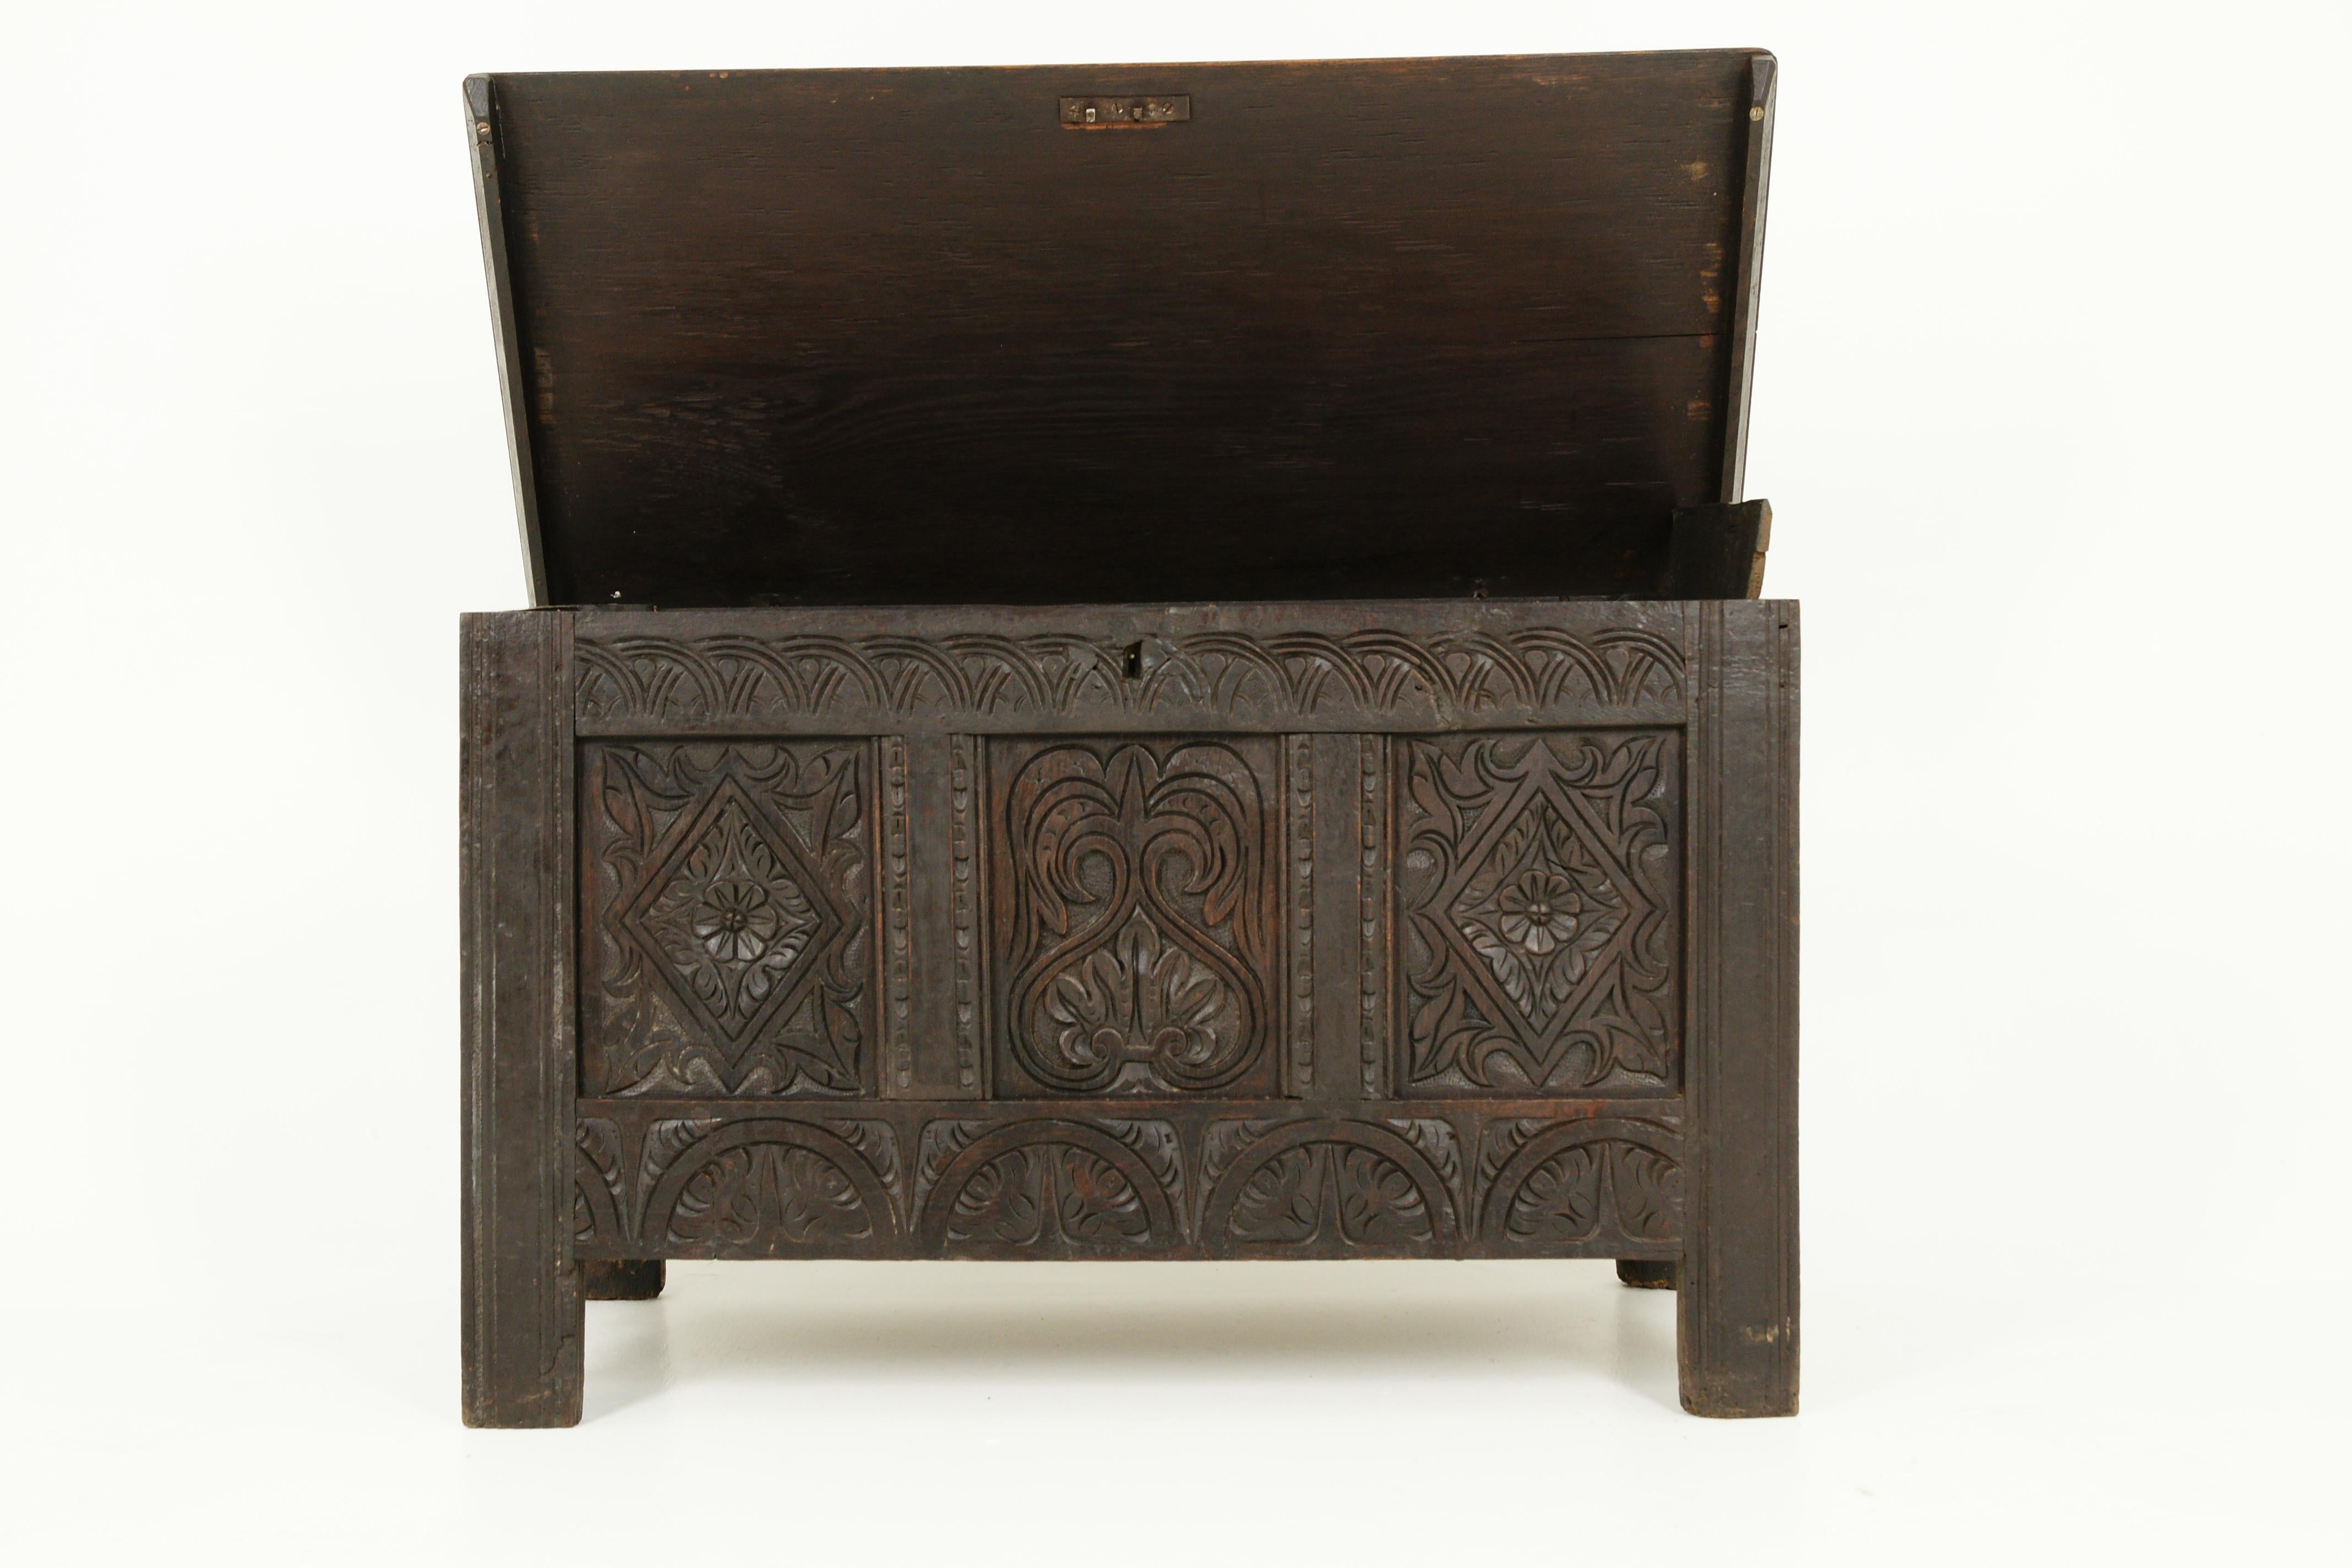 Antique 18th century trunk, carved oak coffer, Scotland 1780, B2371

Scotland, 1780
Solid oak
Original finish
Solid oak moulded top
Lid lifts up and has a large storage compartment
A candle box on the right side
Carved frieze